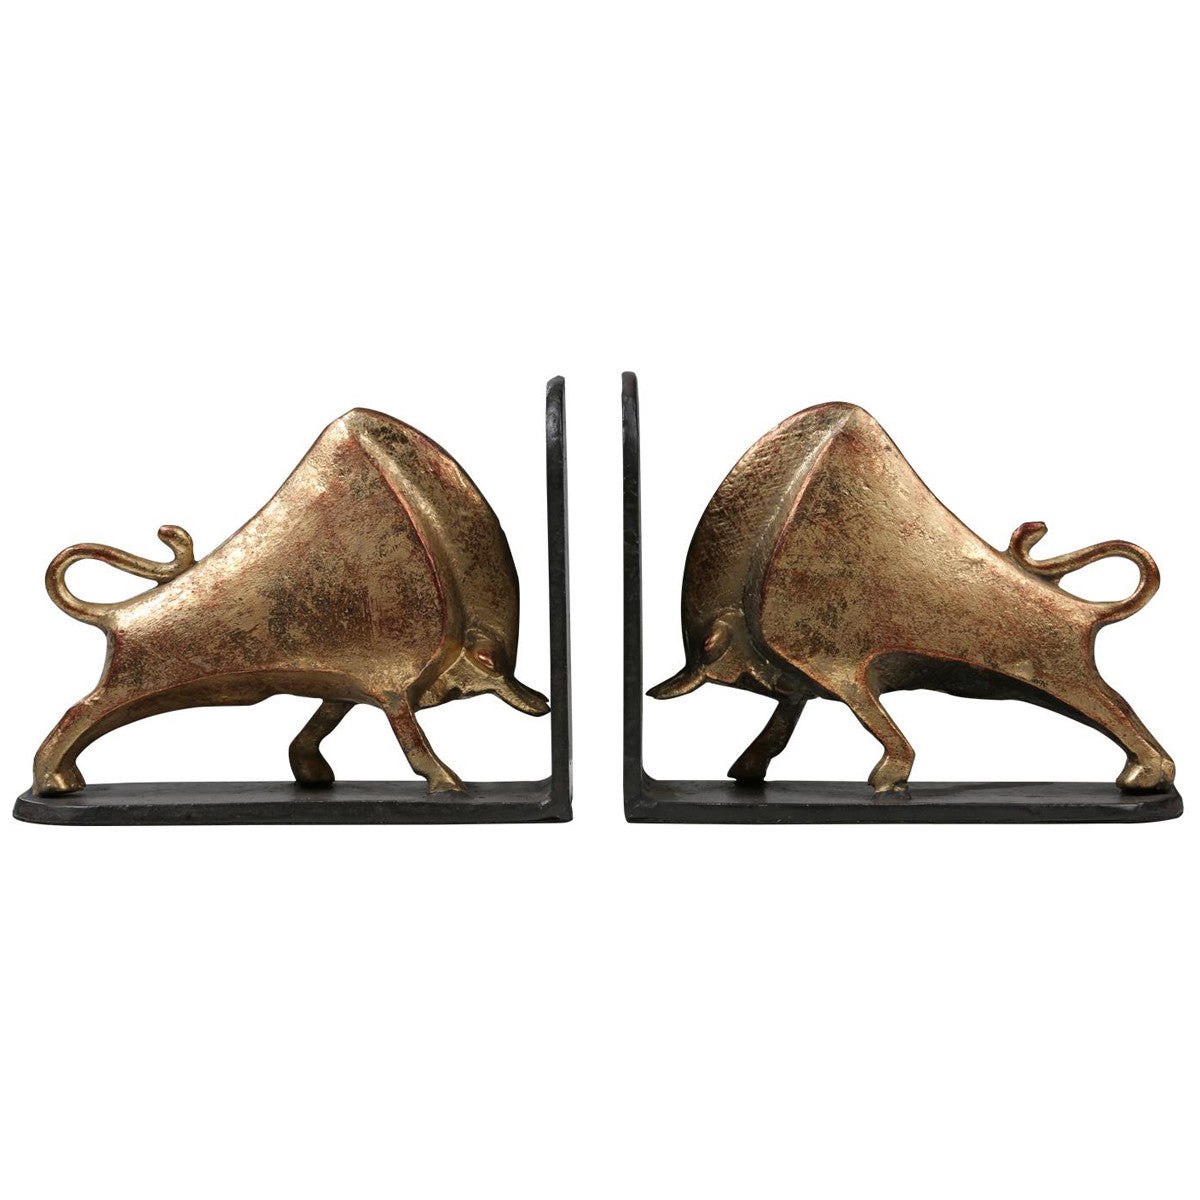 Villa & House Bisoni Bookends Set of 2 in Gold